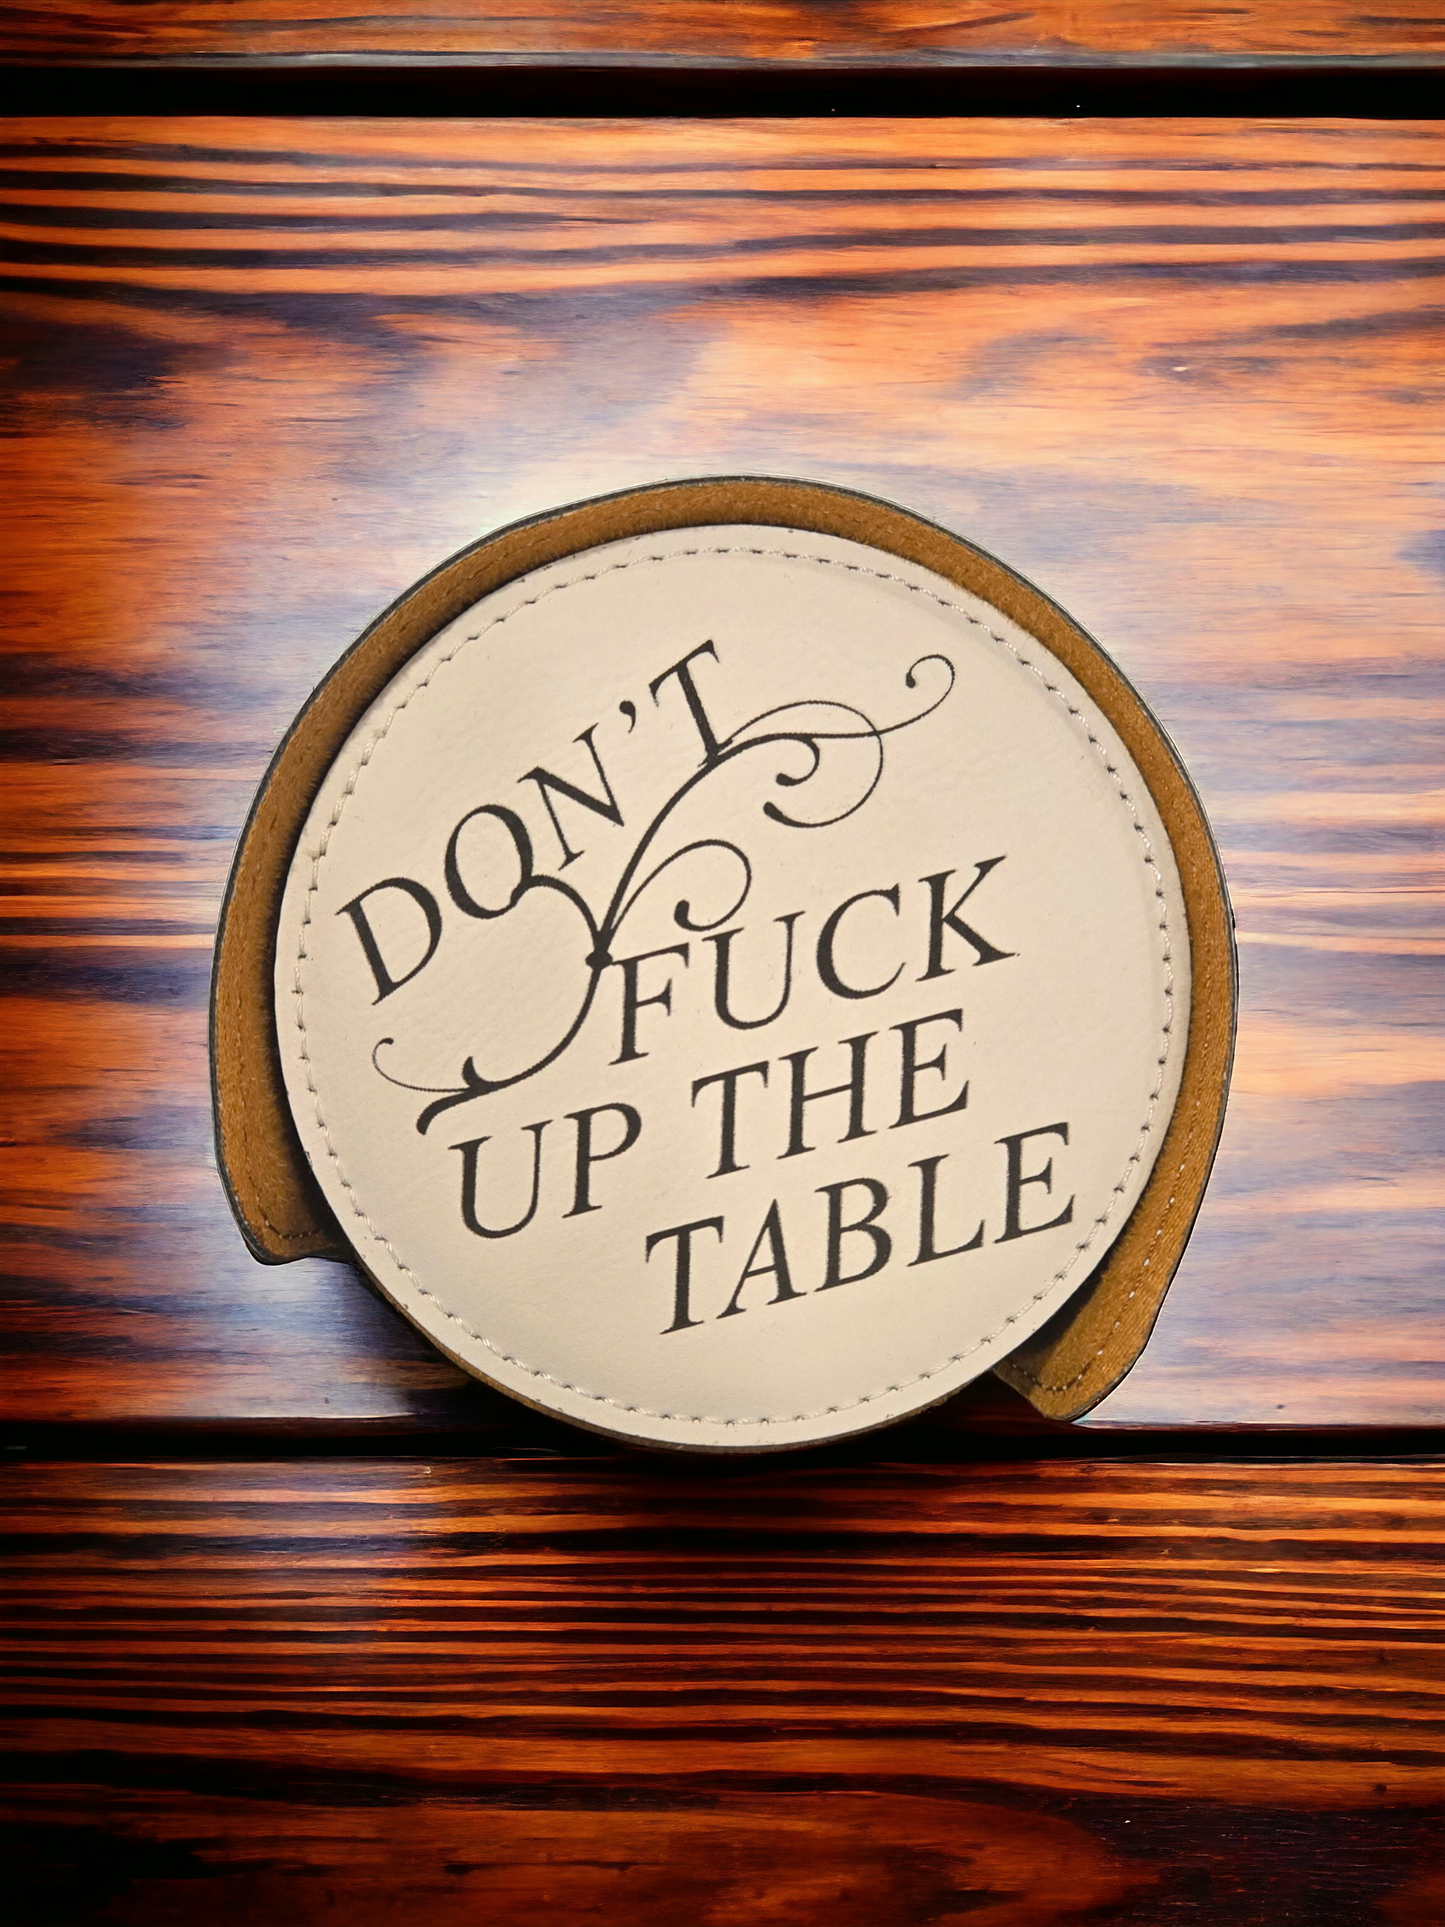 4" Round Leatherette Coaster Set (6 Pc. With Holder) "Don't Fu&# up the Table"